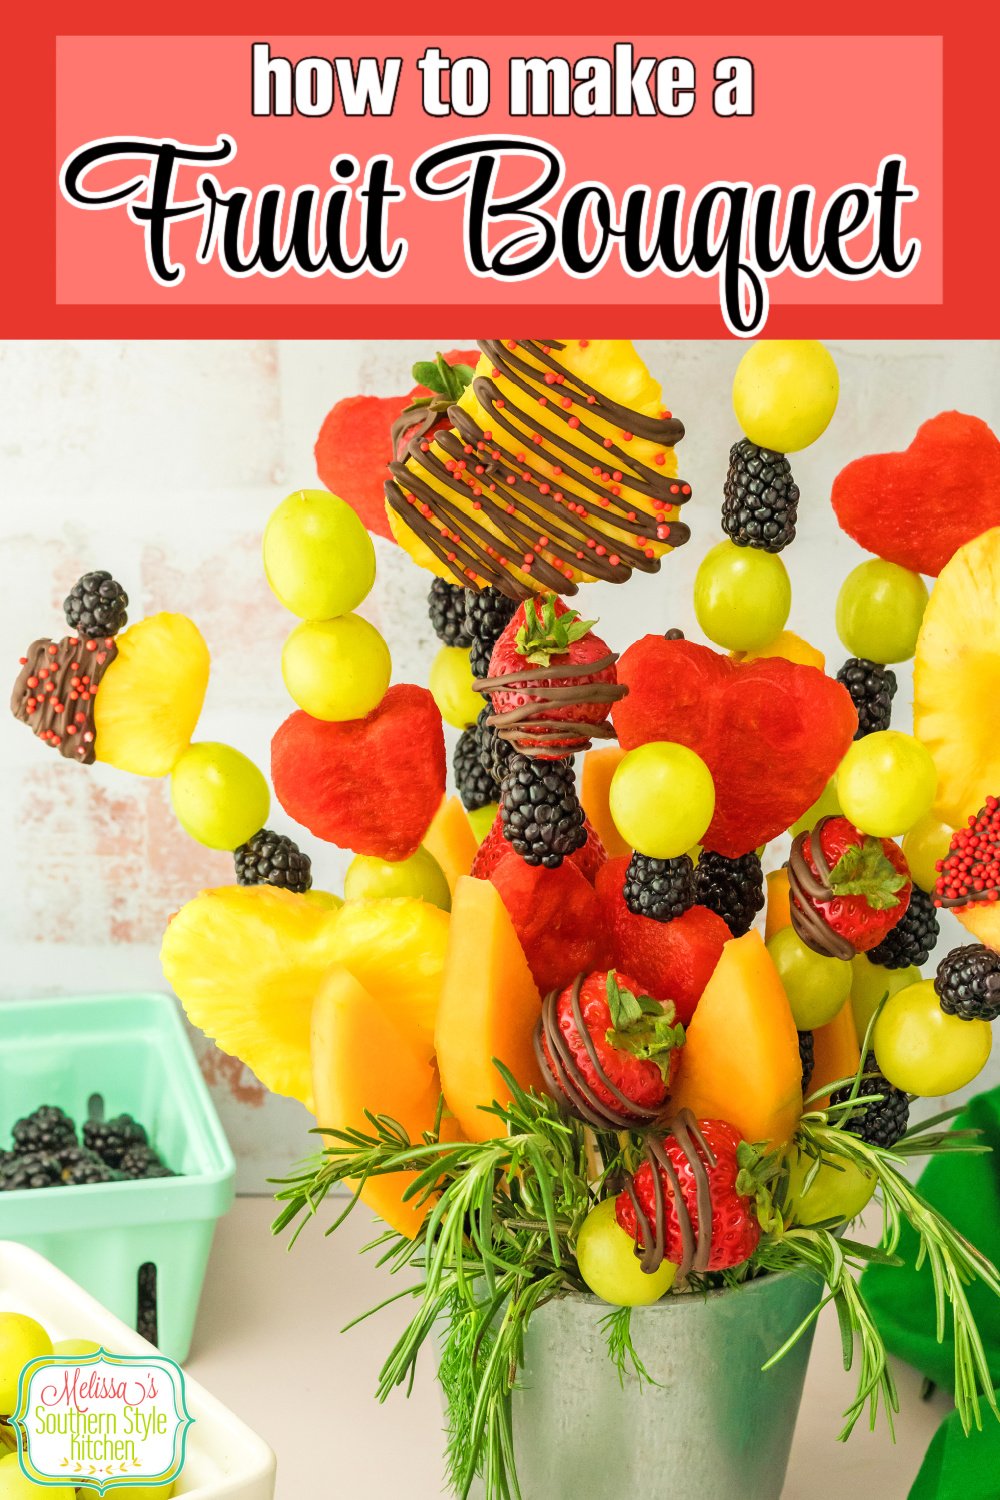 Share this Fruit Bouquet with the special people in your lives #fruitbouquet #howtomakeafruitbouquet #bestfruitbouquets #Valentinedaydesserts #valentinesdaygifts #freshfruit #fruit #fruitrecipes #dessert #dessertrecipes #homemadegifts via @melissasssk